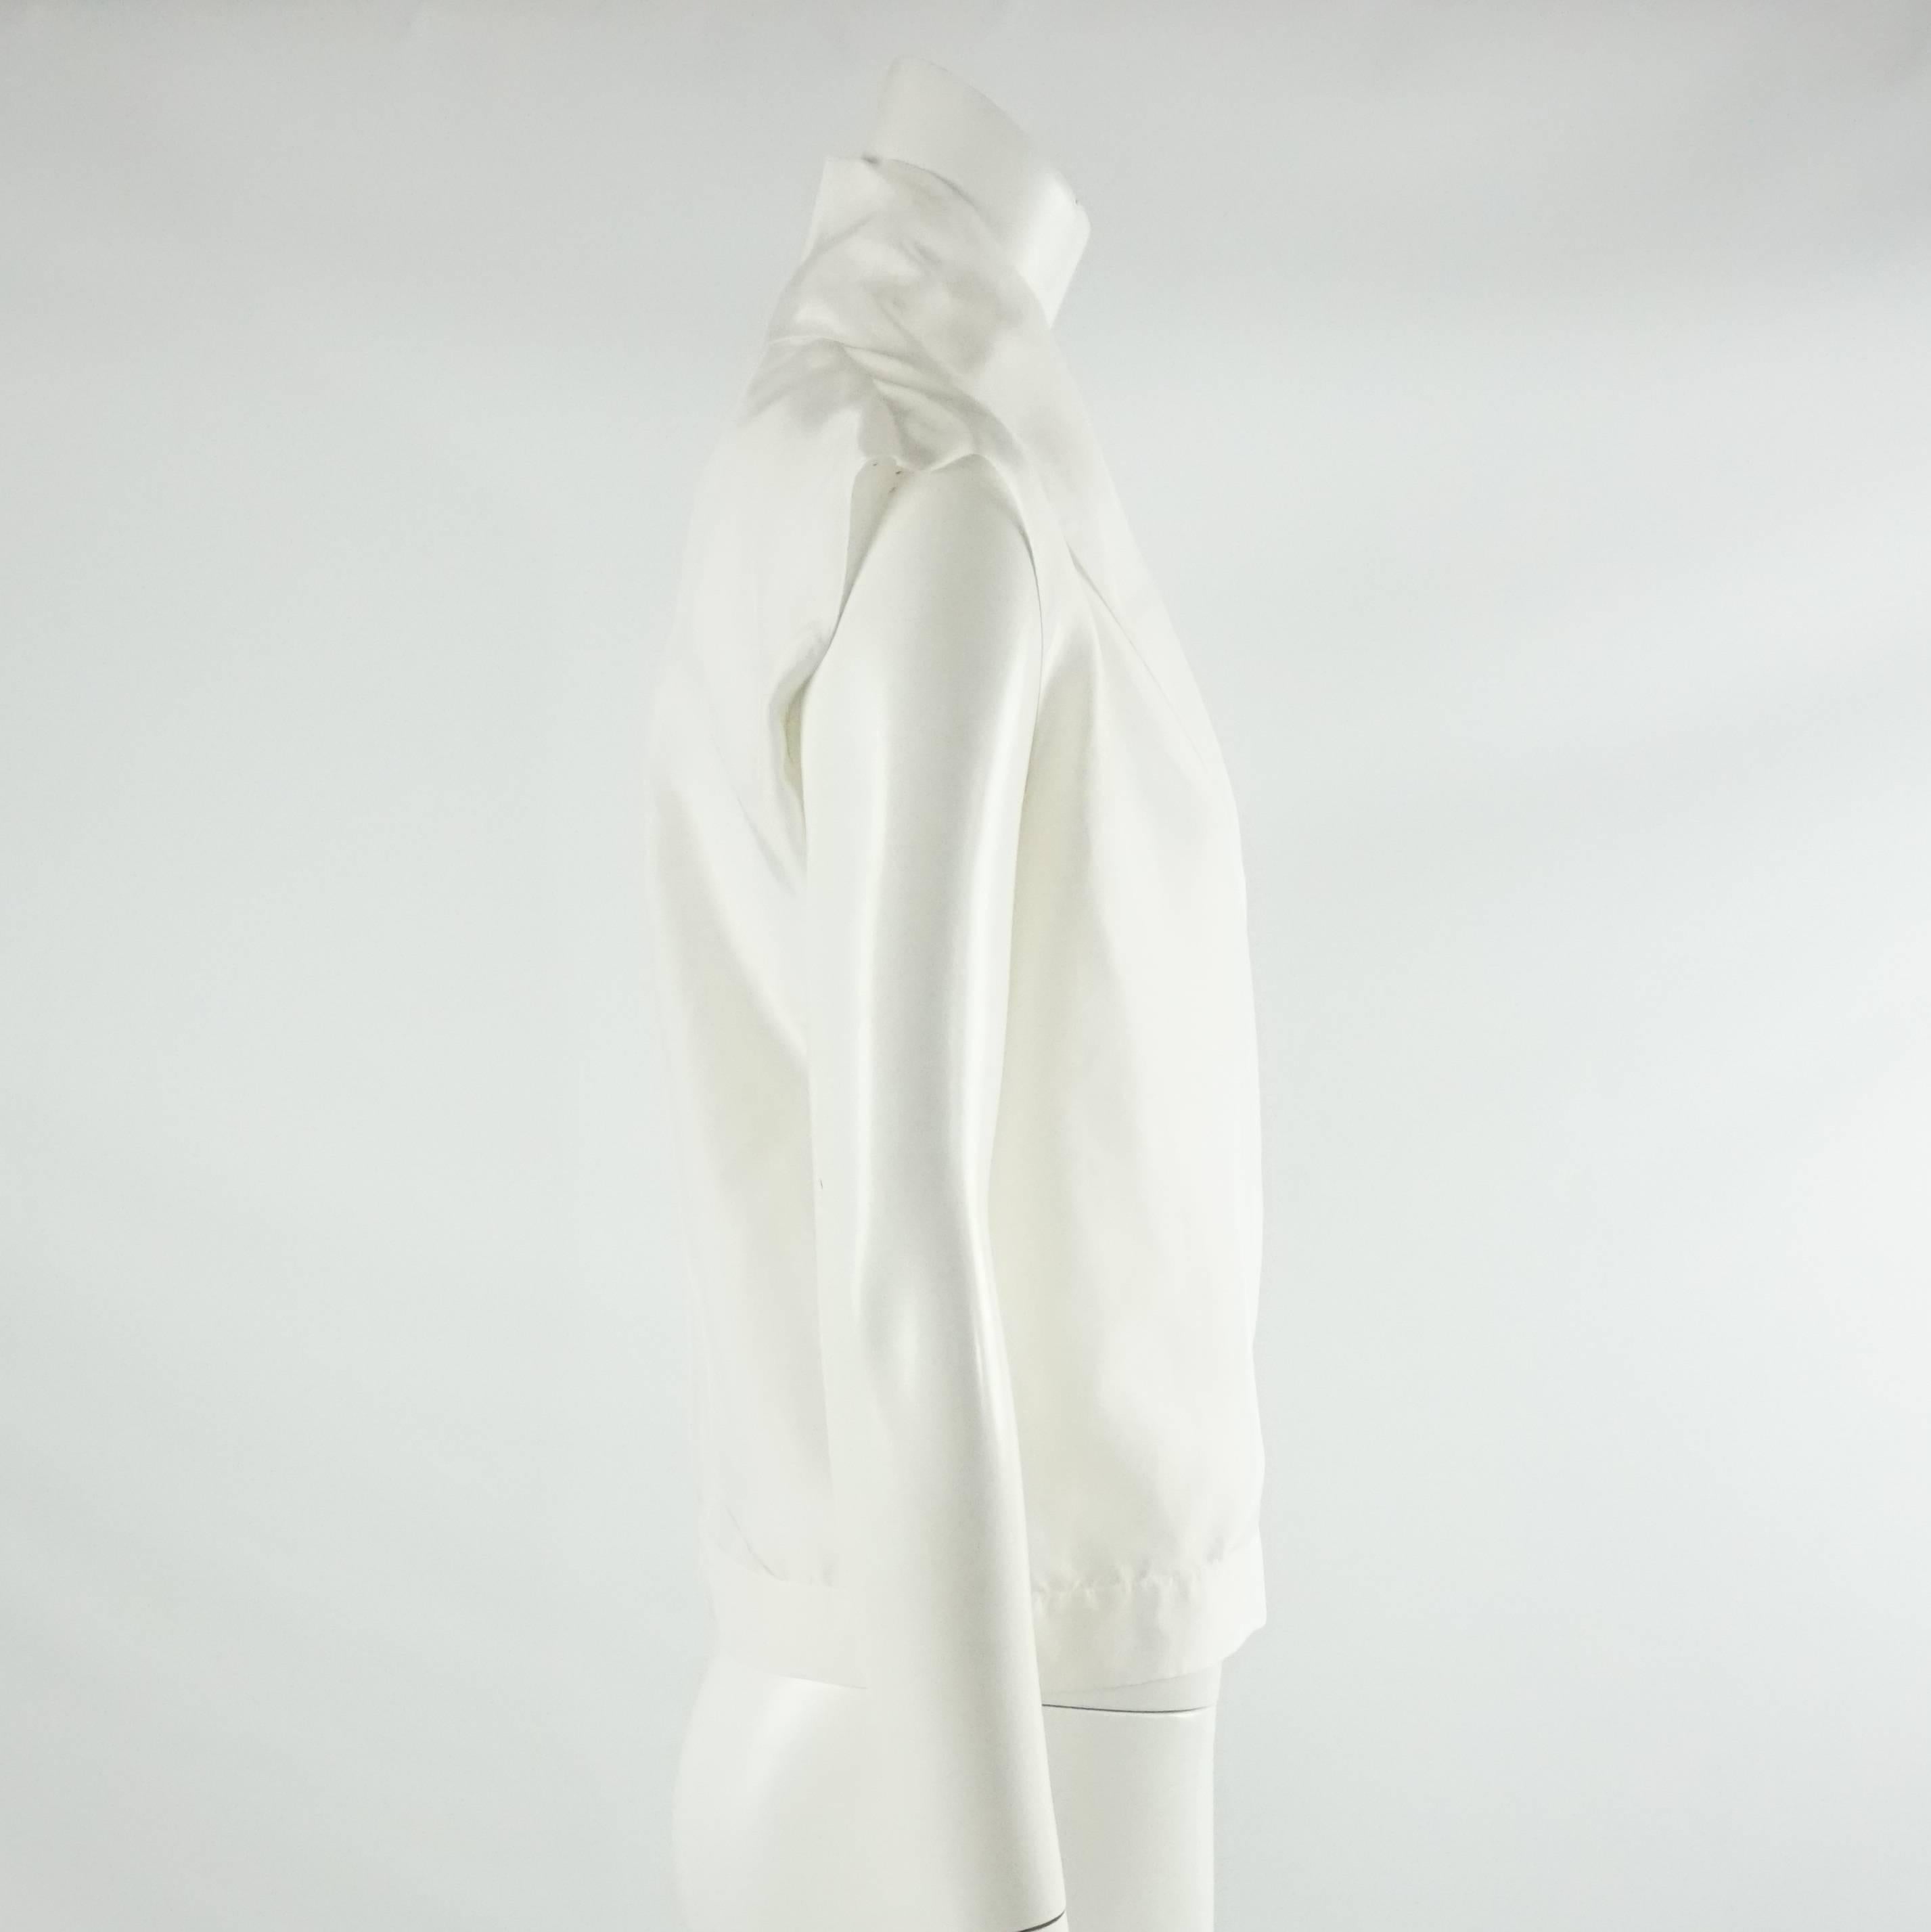 This classic YSL white cotton top is a very versatile piece. It is sleeveless with an overall loose fit and crossing front. The blouse is in excellent condition with no visible wear. Size, circa 2012. Size 36

Measurements
Shoulder to Shoulder: